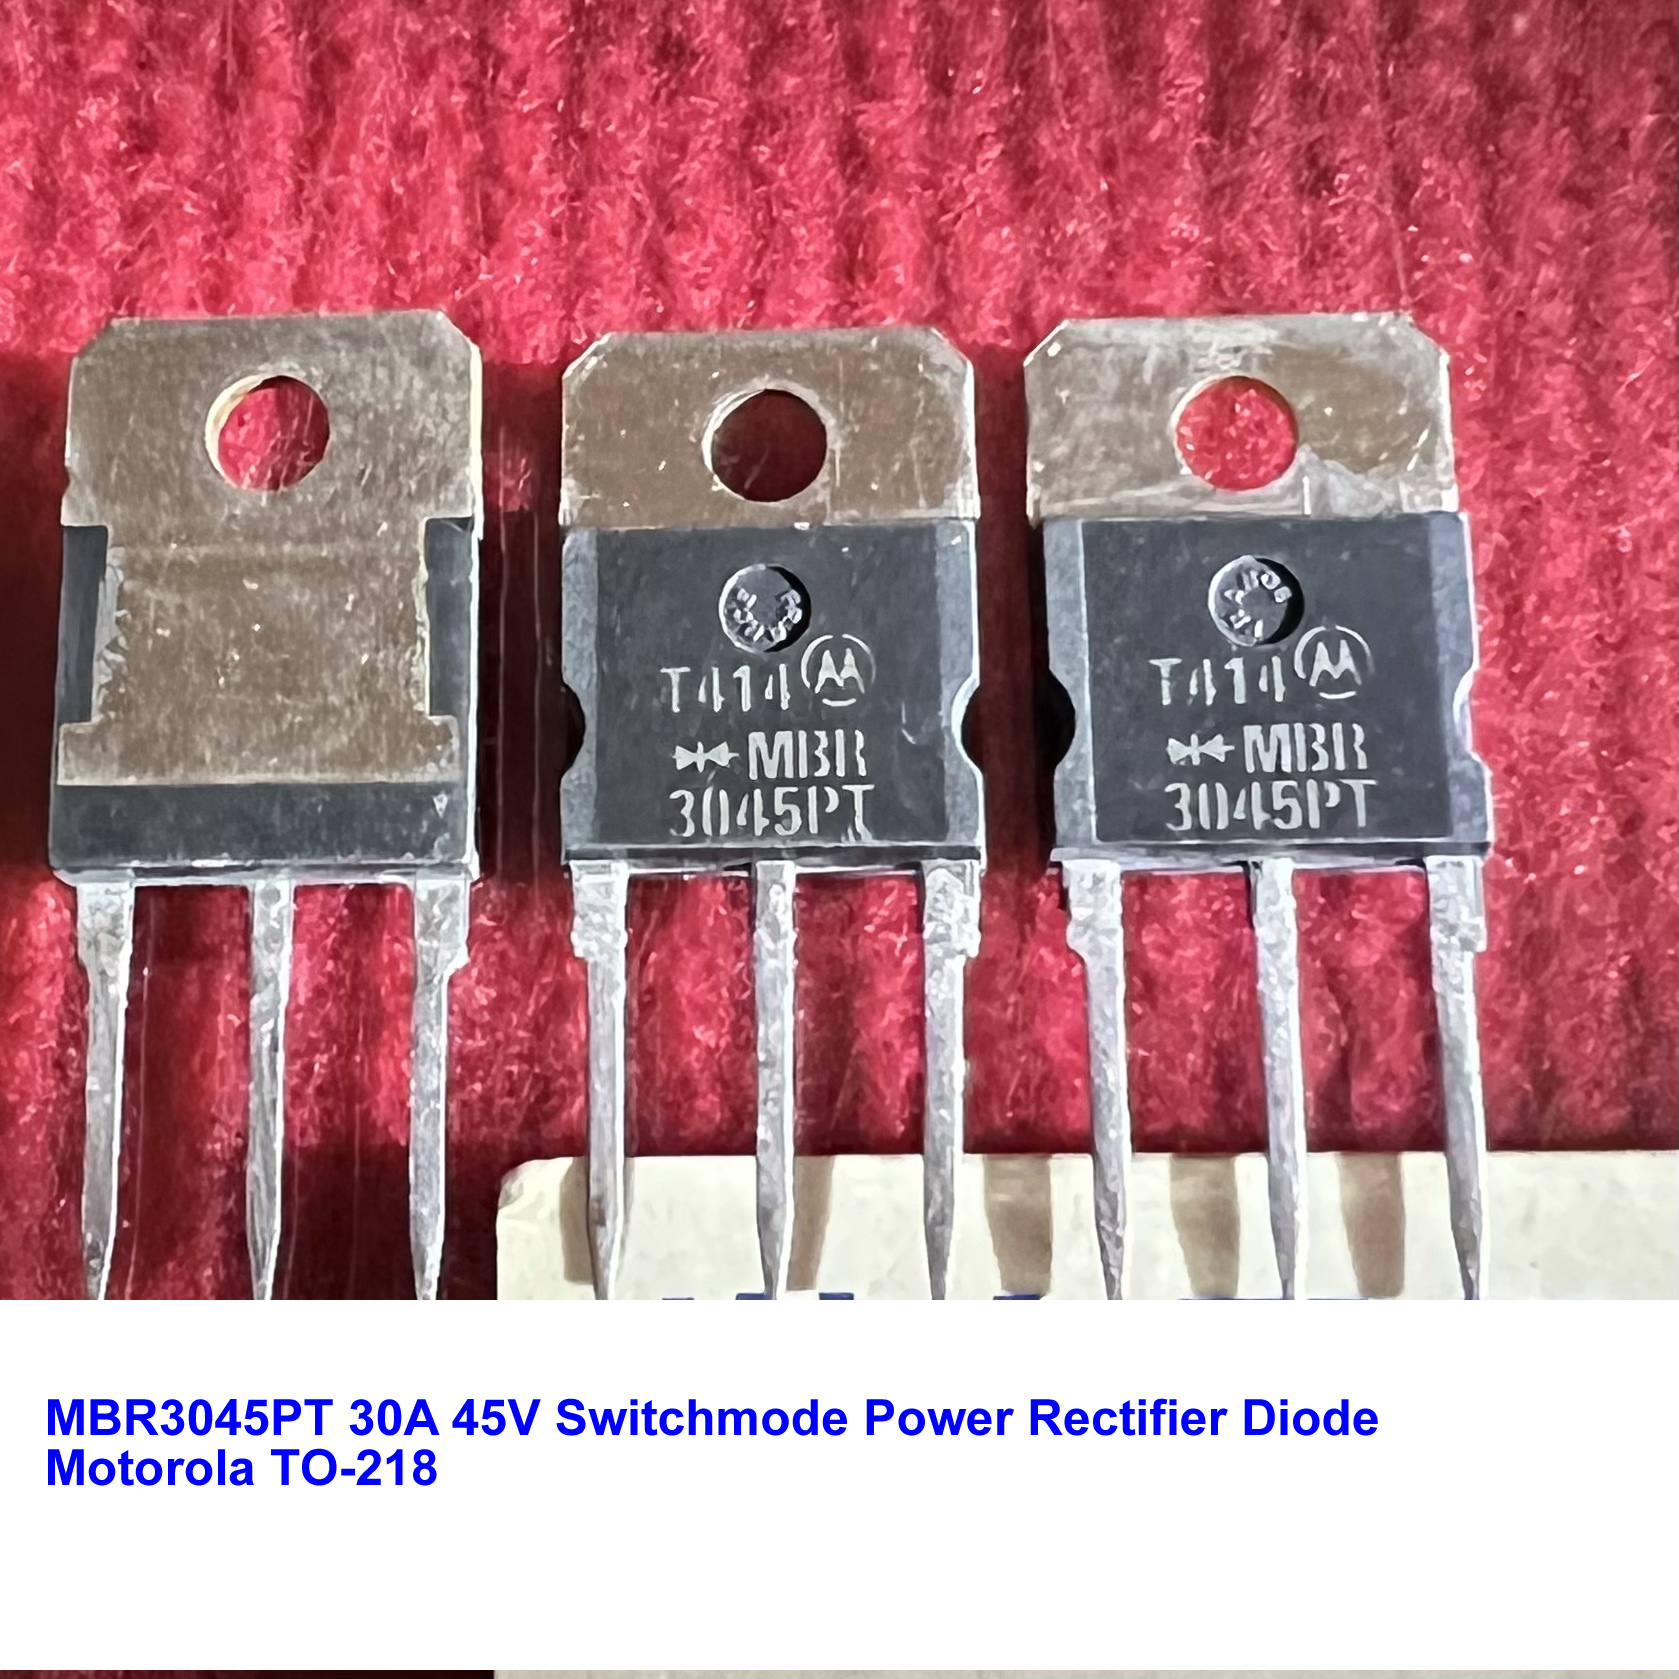 MBR3045PT 30A 45V Switchmode Power Rectifier Diode Motorola TO-2